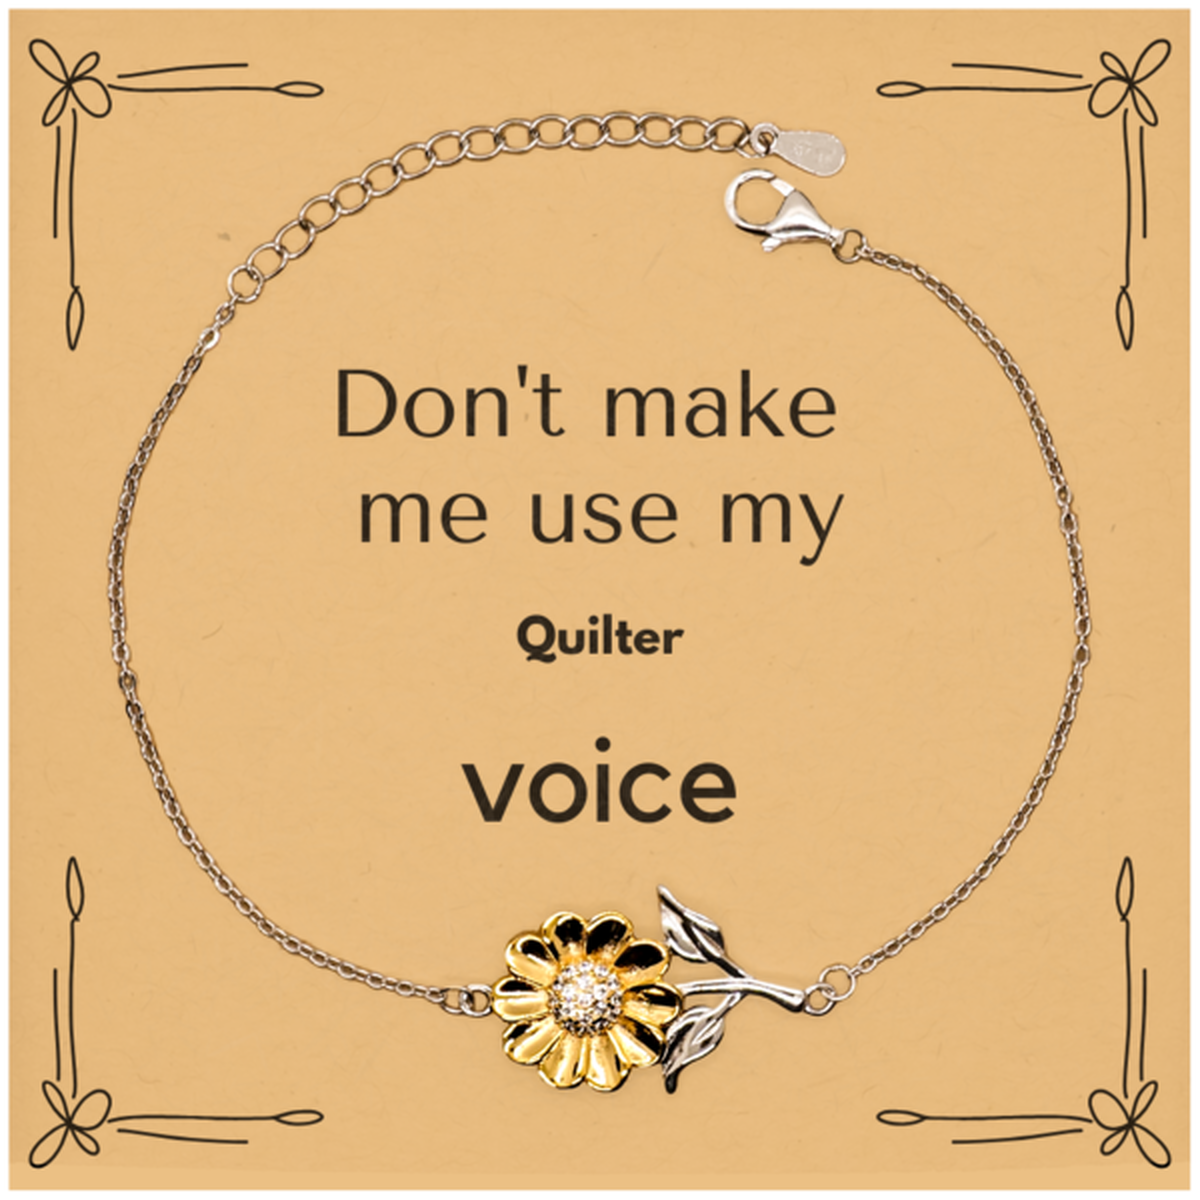 Don't make me use my Quilter voice, Sarcasm Quilter Card Gifts, Christmas Quilter Sunflower Bracelet Birthday Unique Gifts For Quilter Coworkers, Men, Women, Colleague, Friends